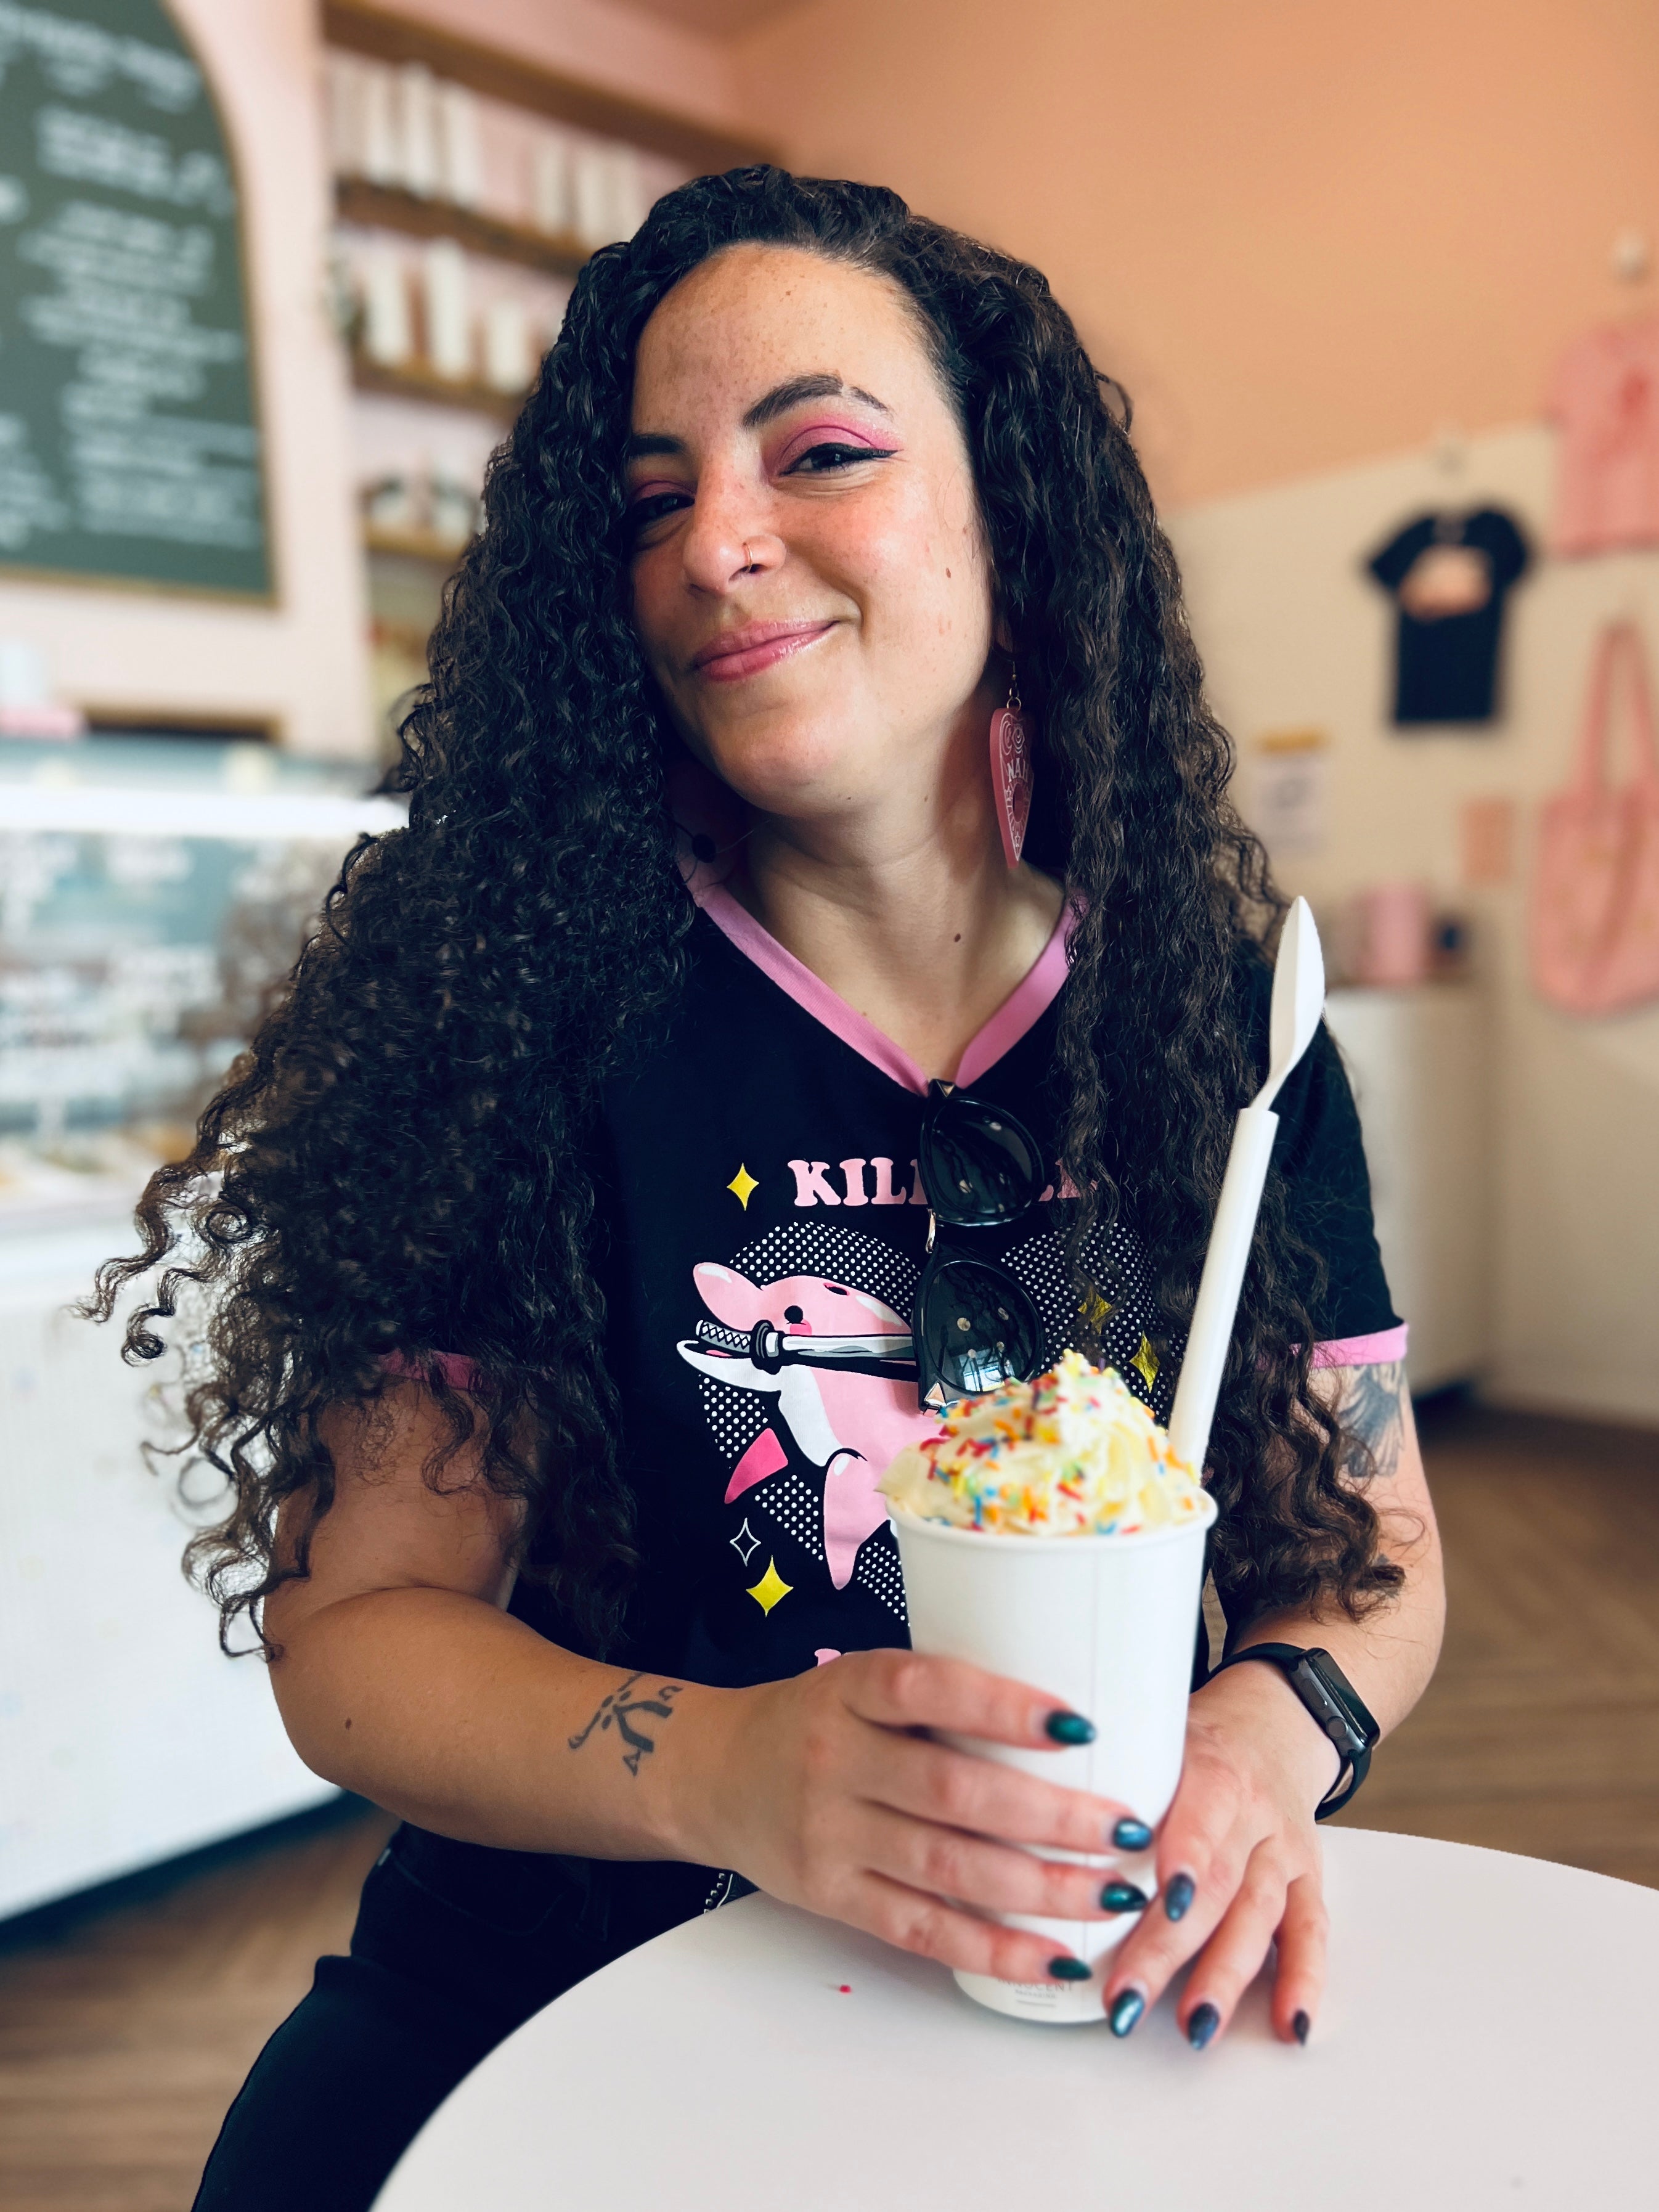 The artist Pepper Raccoon. She's holding a sprinkle covered milkshake and is smiling in an ice cream shop.